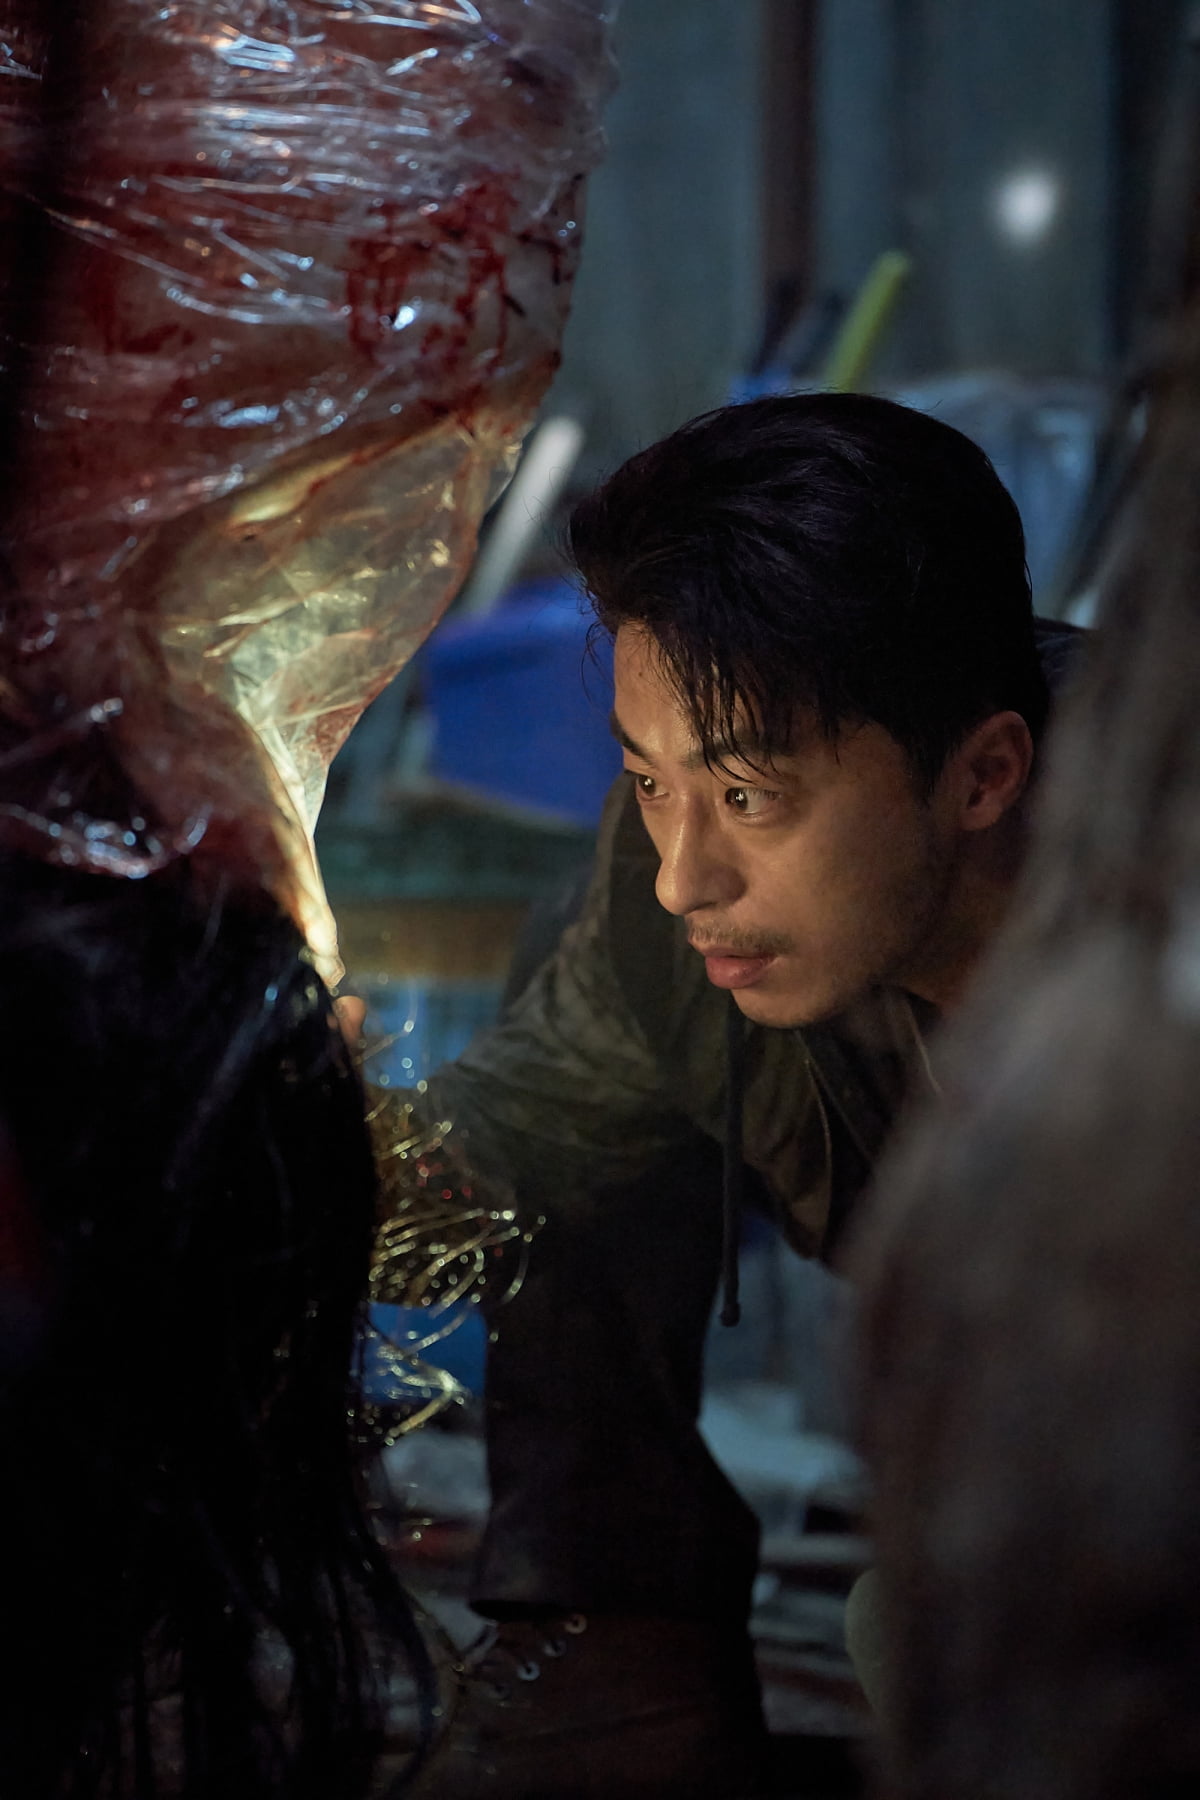 Koo Kyo-hwan and Yeon Sang-ho are characters that should not be missed in the universe.